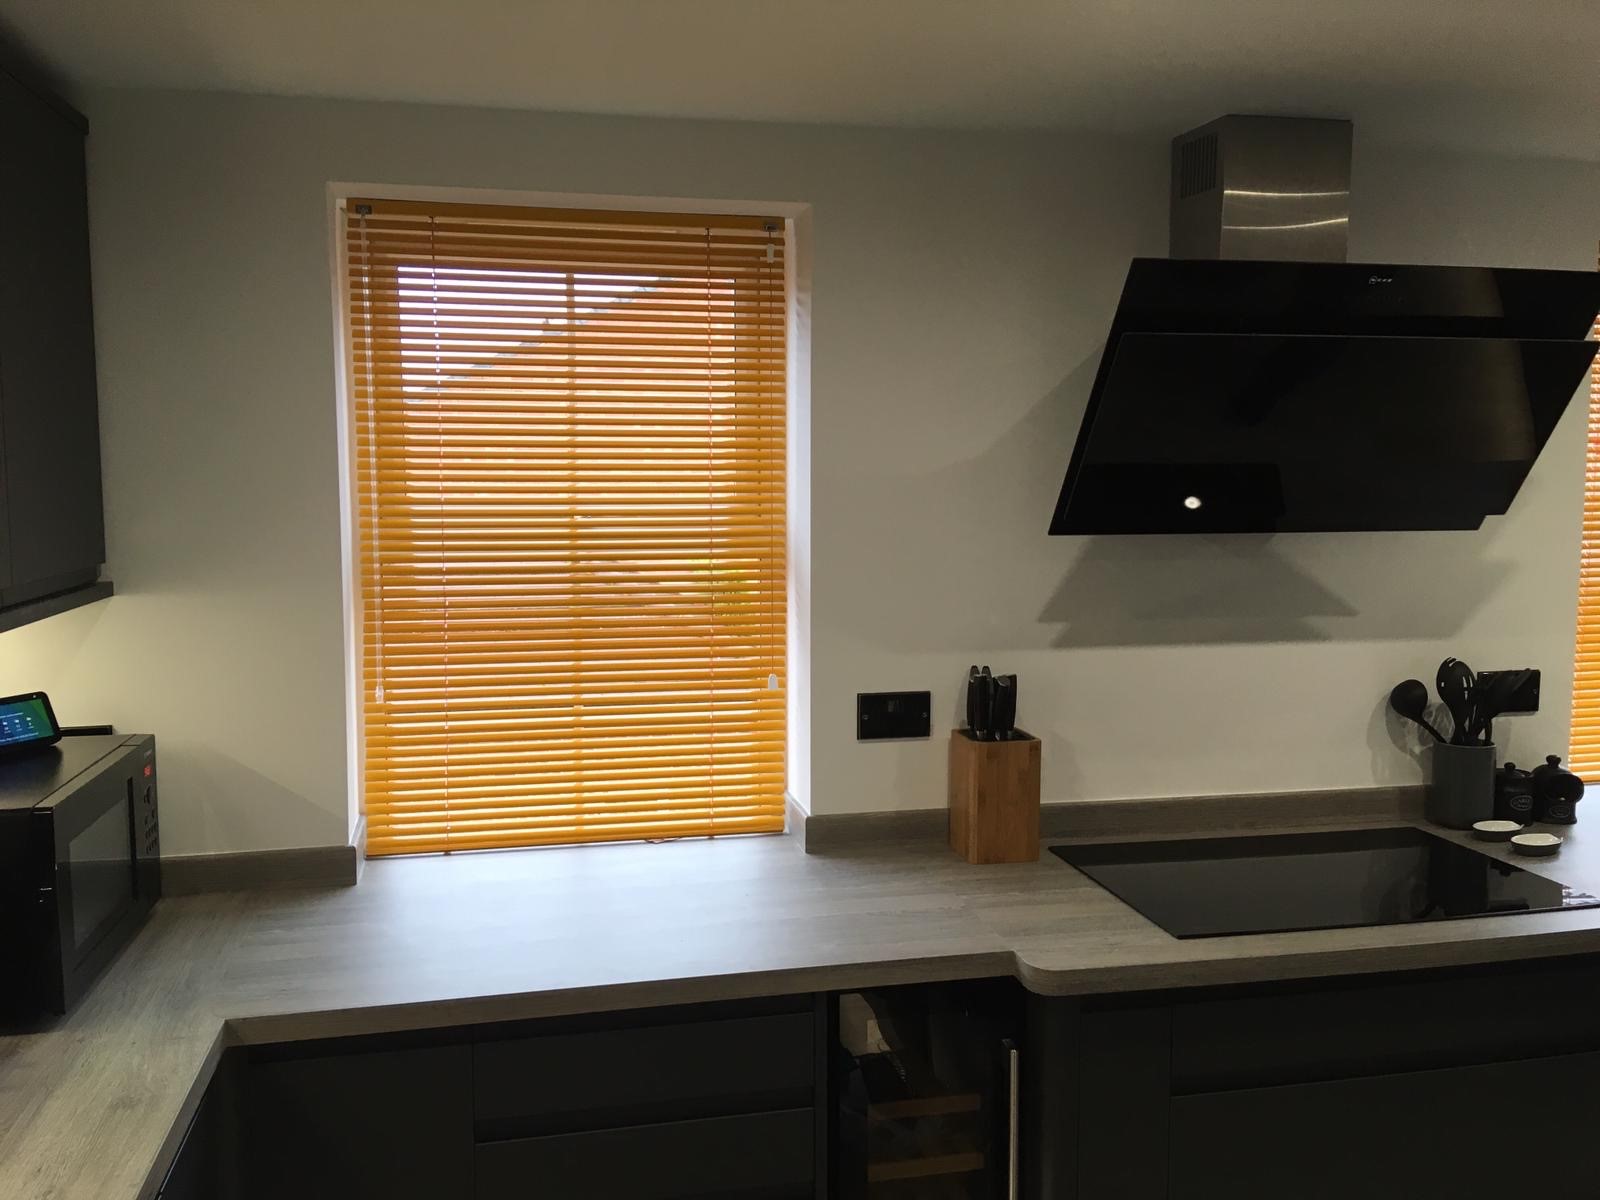 UK Suppliers of Aluminium Blinds For Kitchens